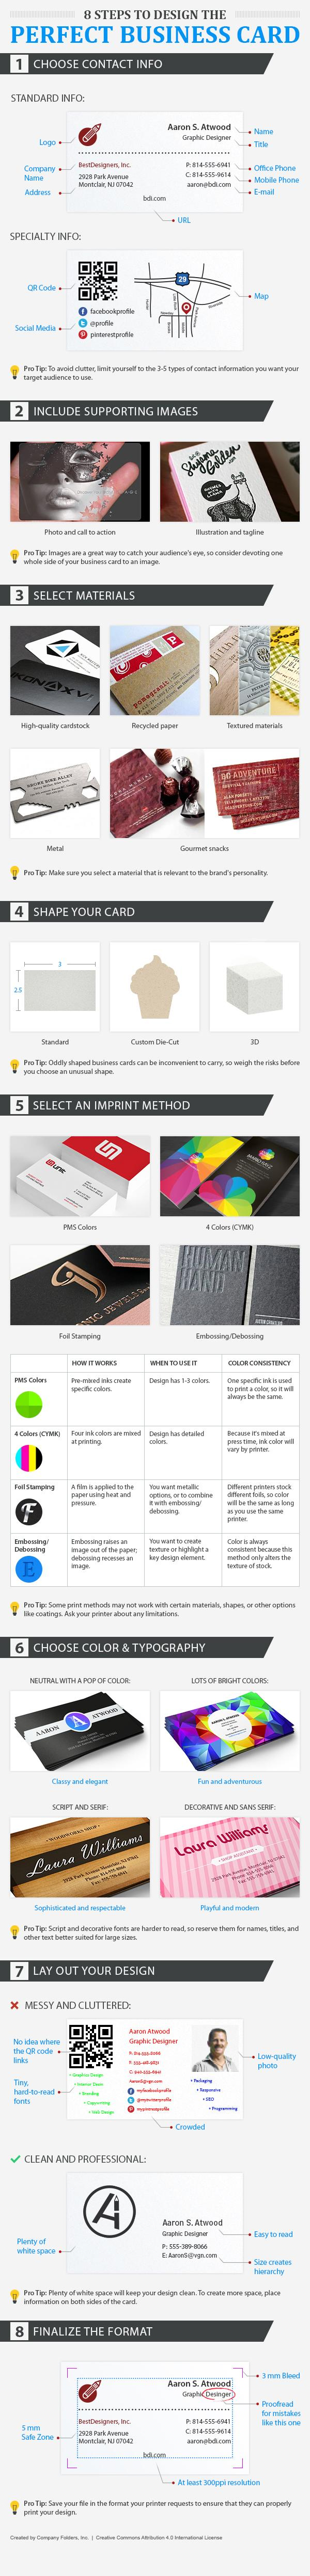 Design business card infographic